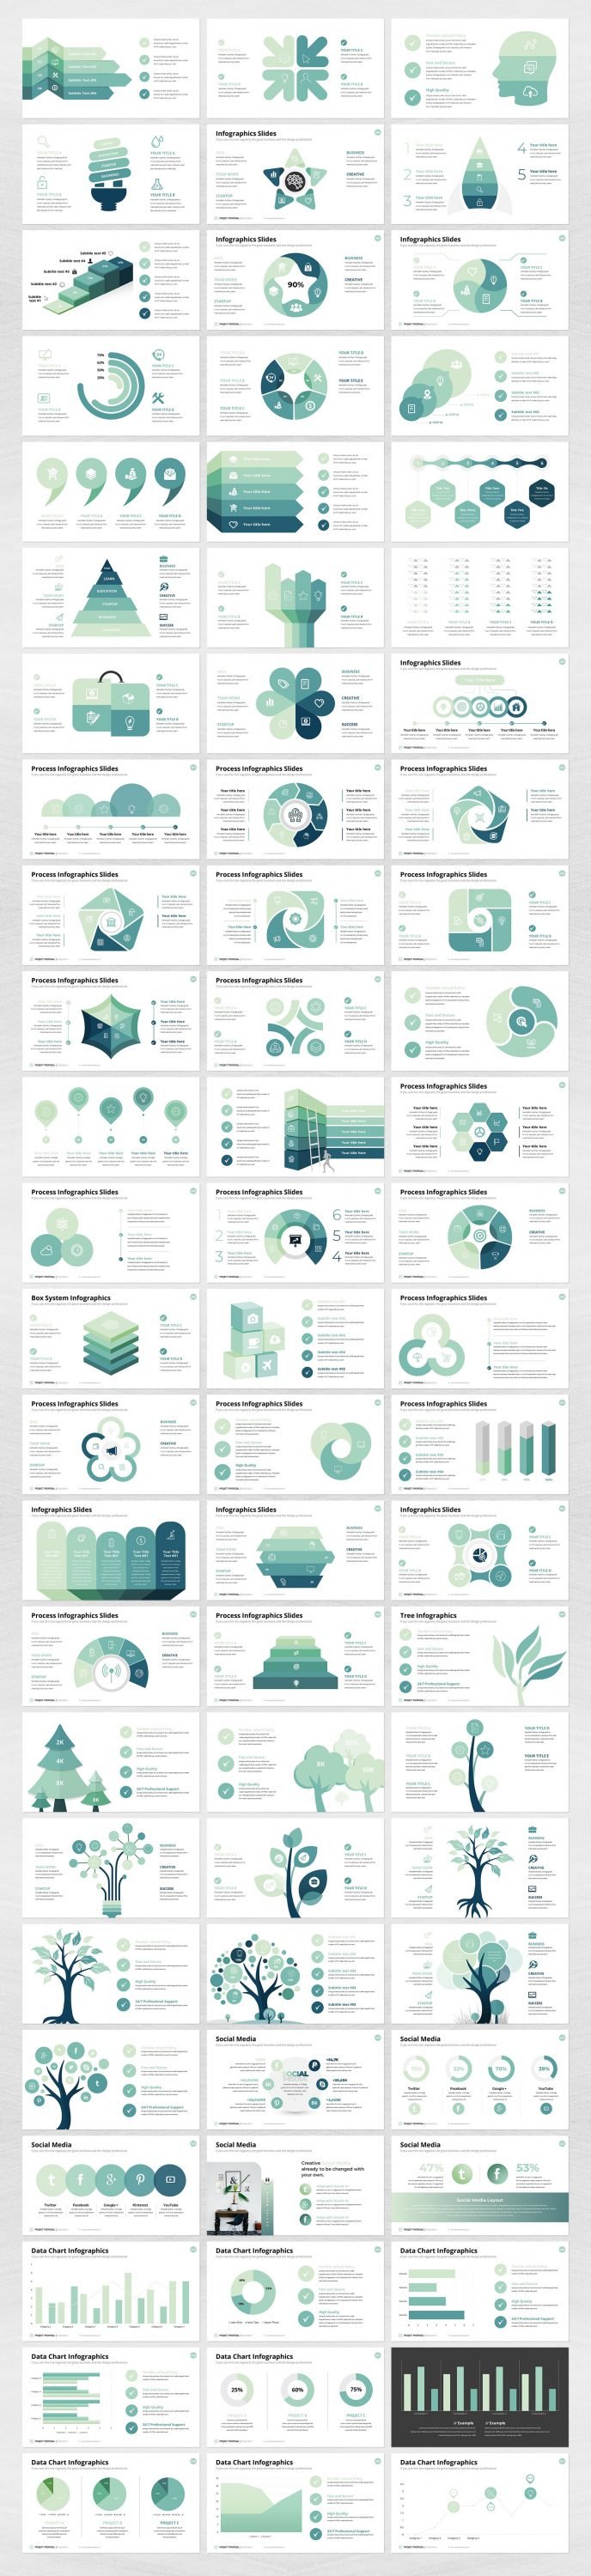 The template collection contains a lot of infographics in light green color.